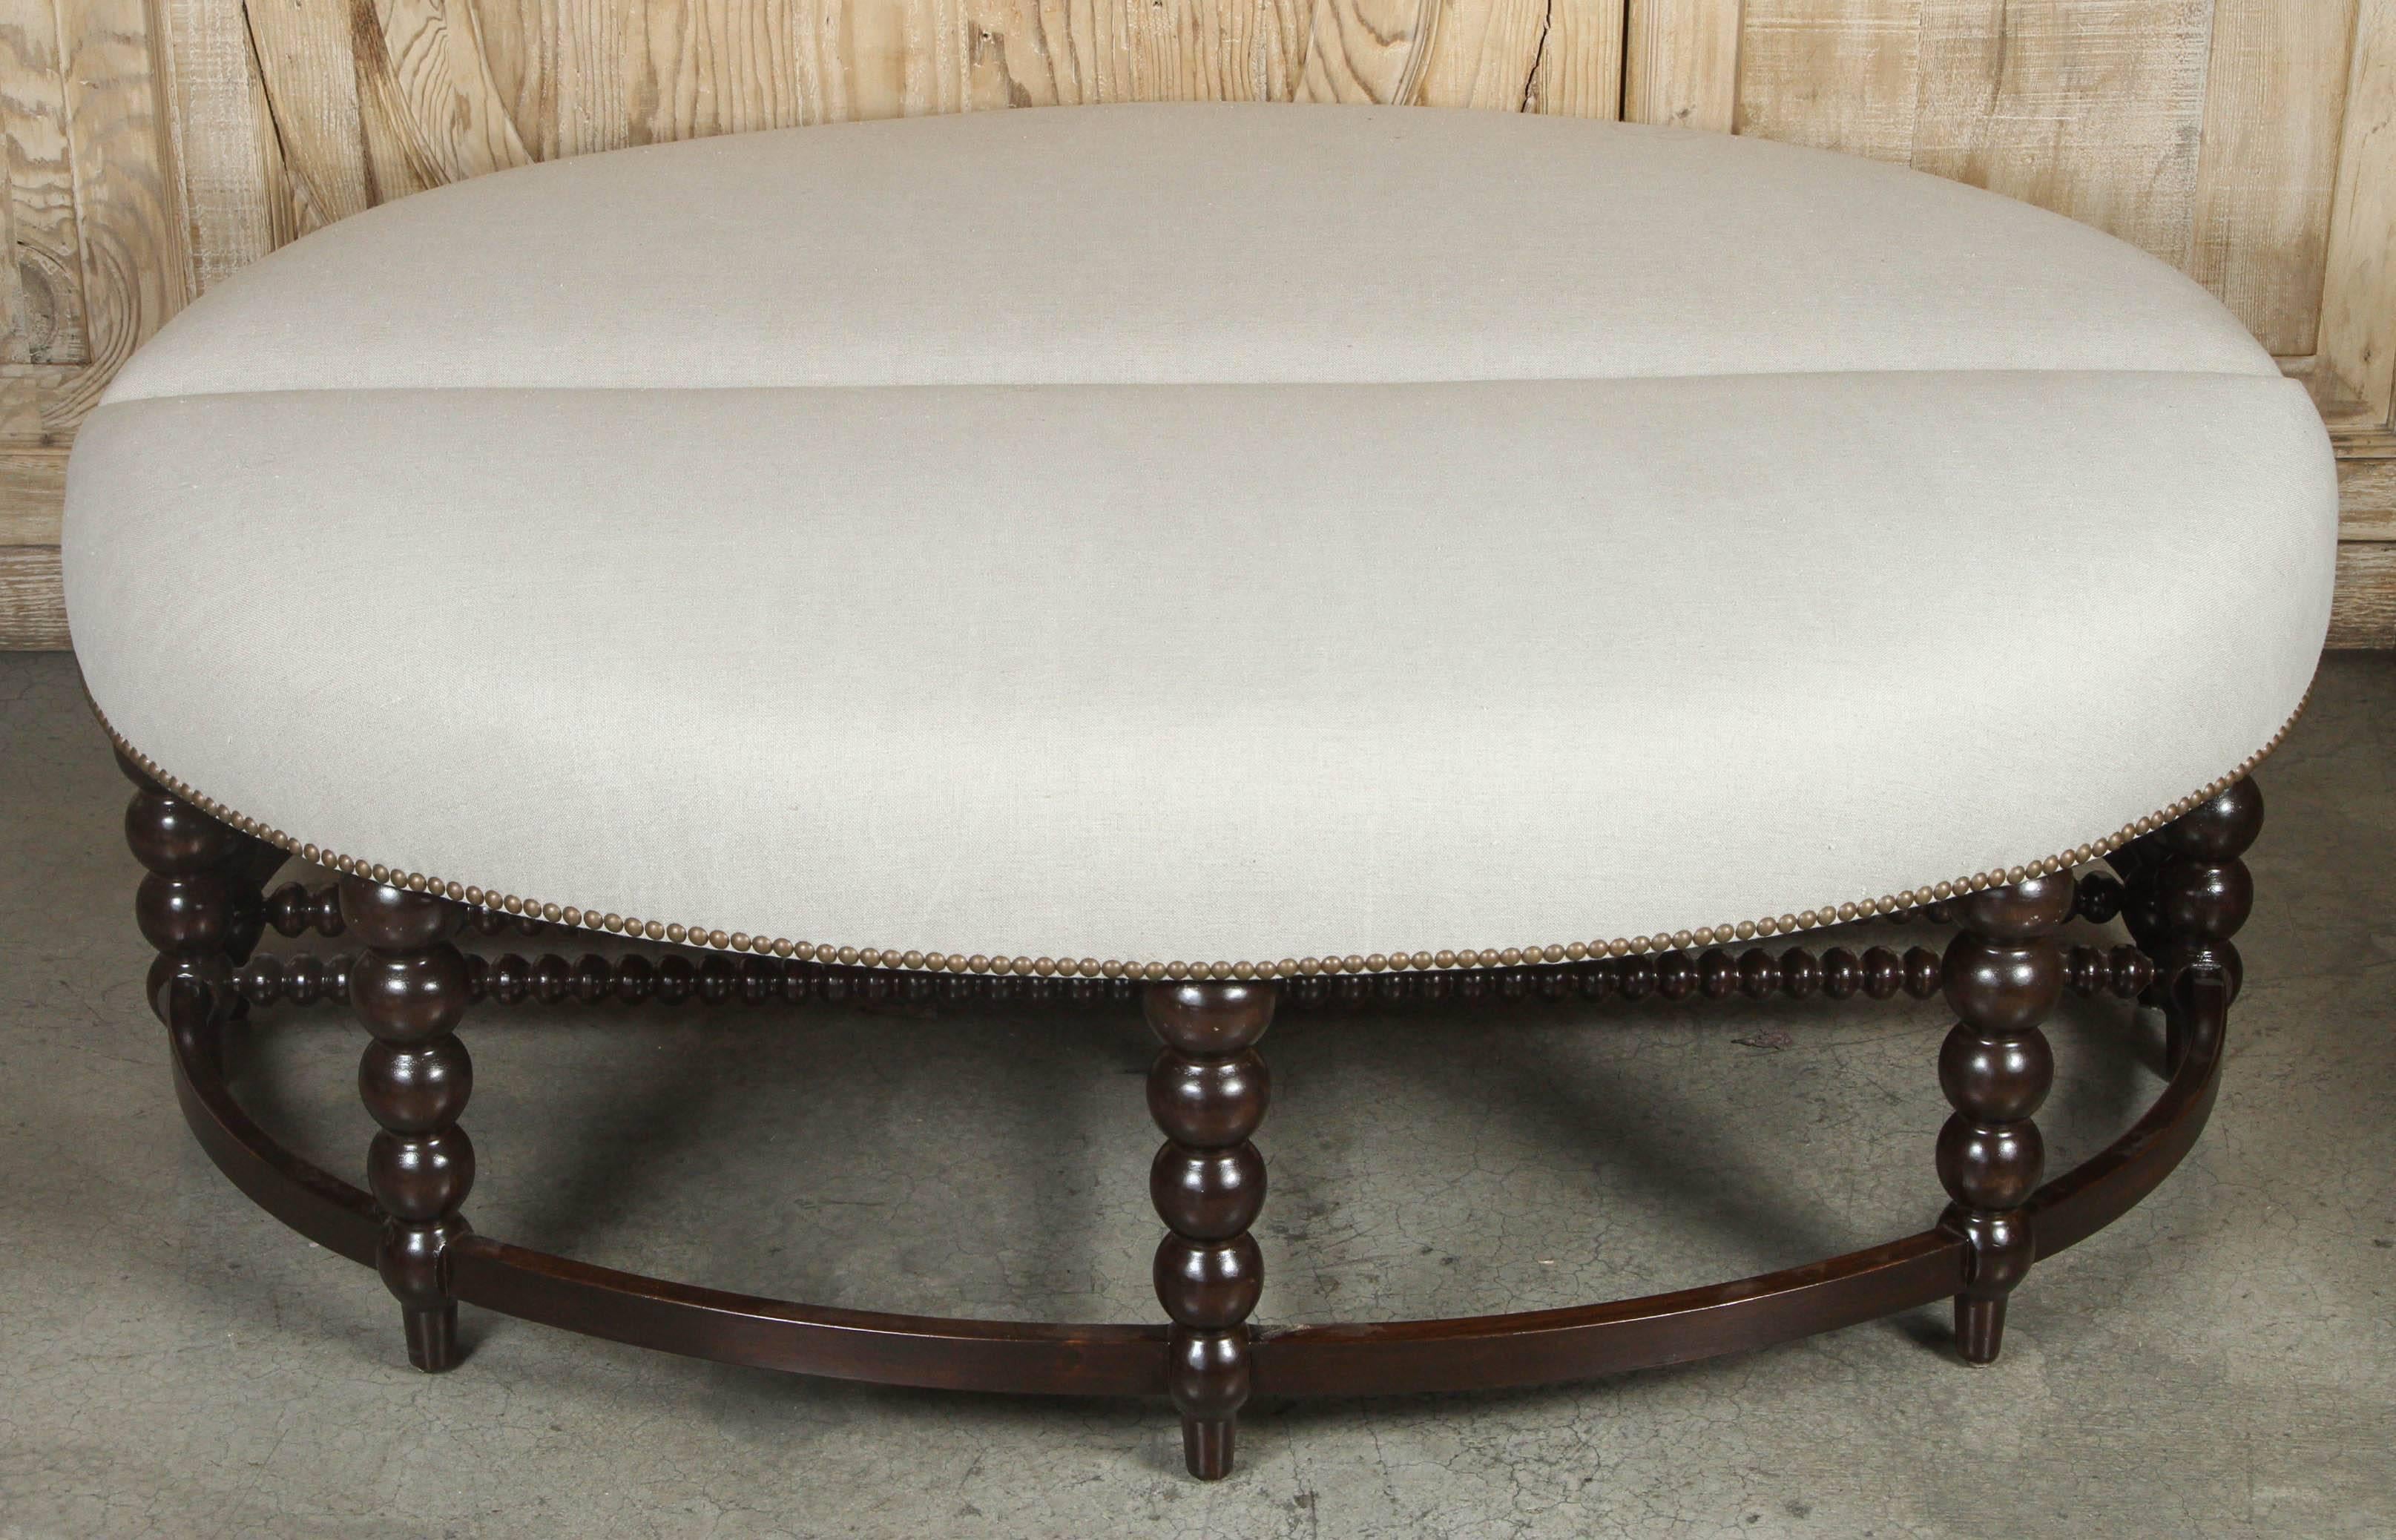 Pair of vintage spool leg half circle ottomans. Newly refinished and upholstered in flax linen with nail head trim.